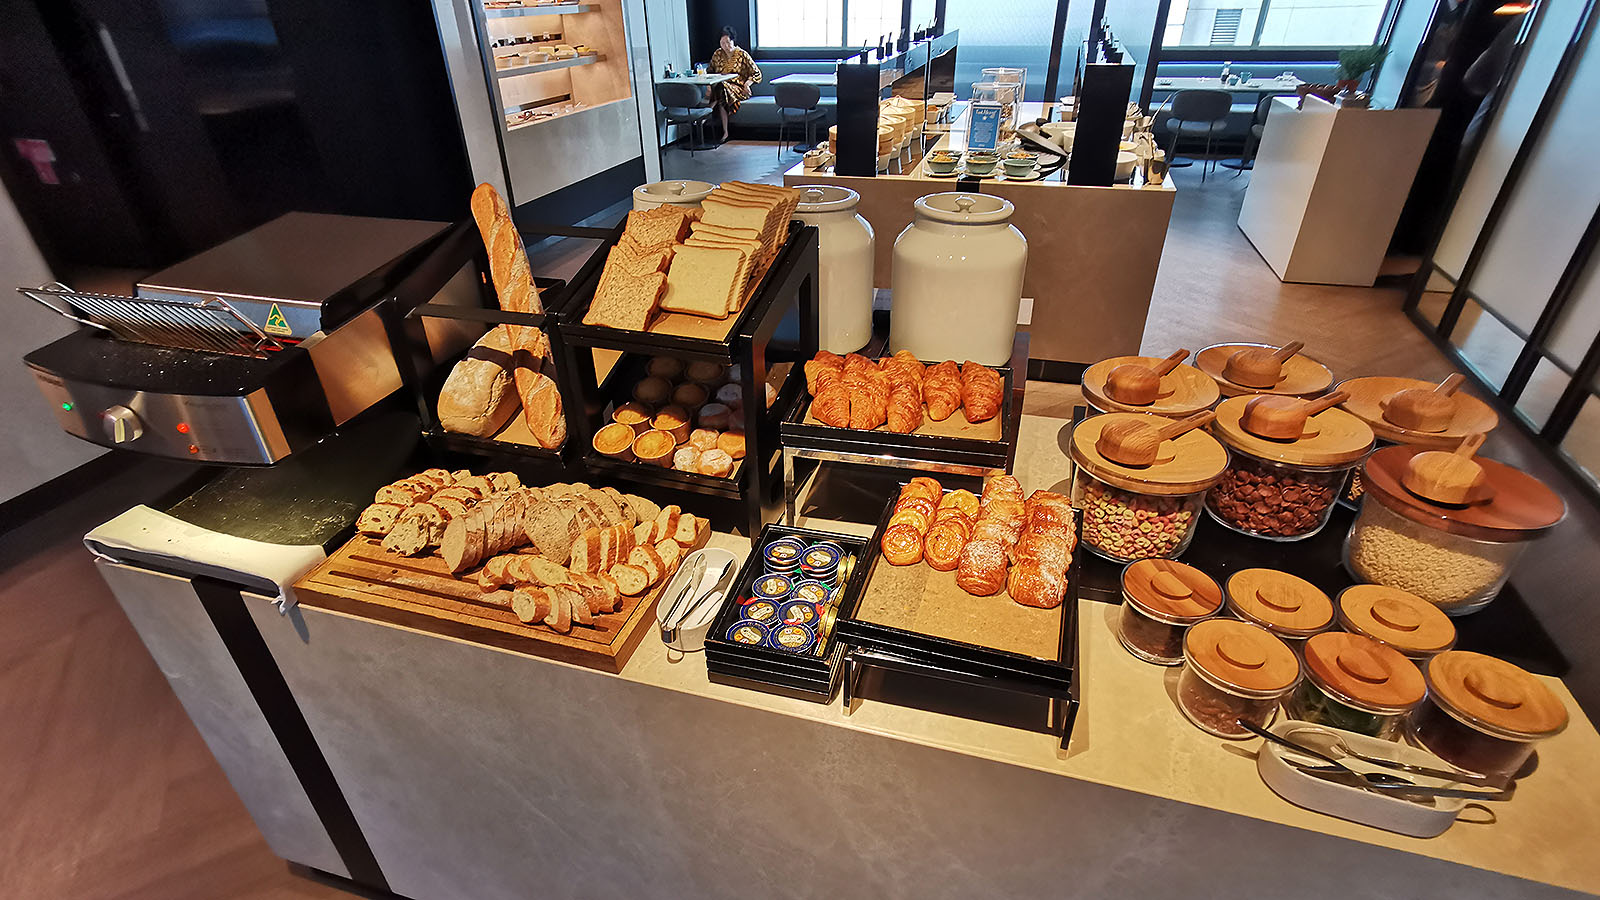 Pastries arranged at breakfast at the Hilton Singapore Orchard Executive Lounge